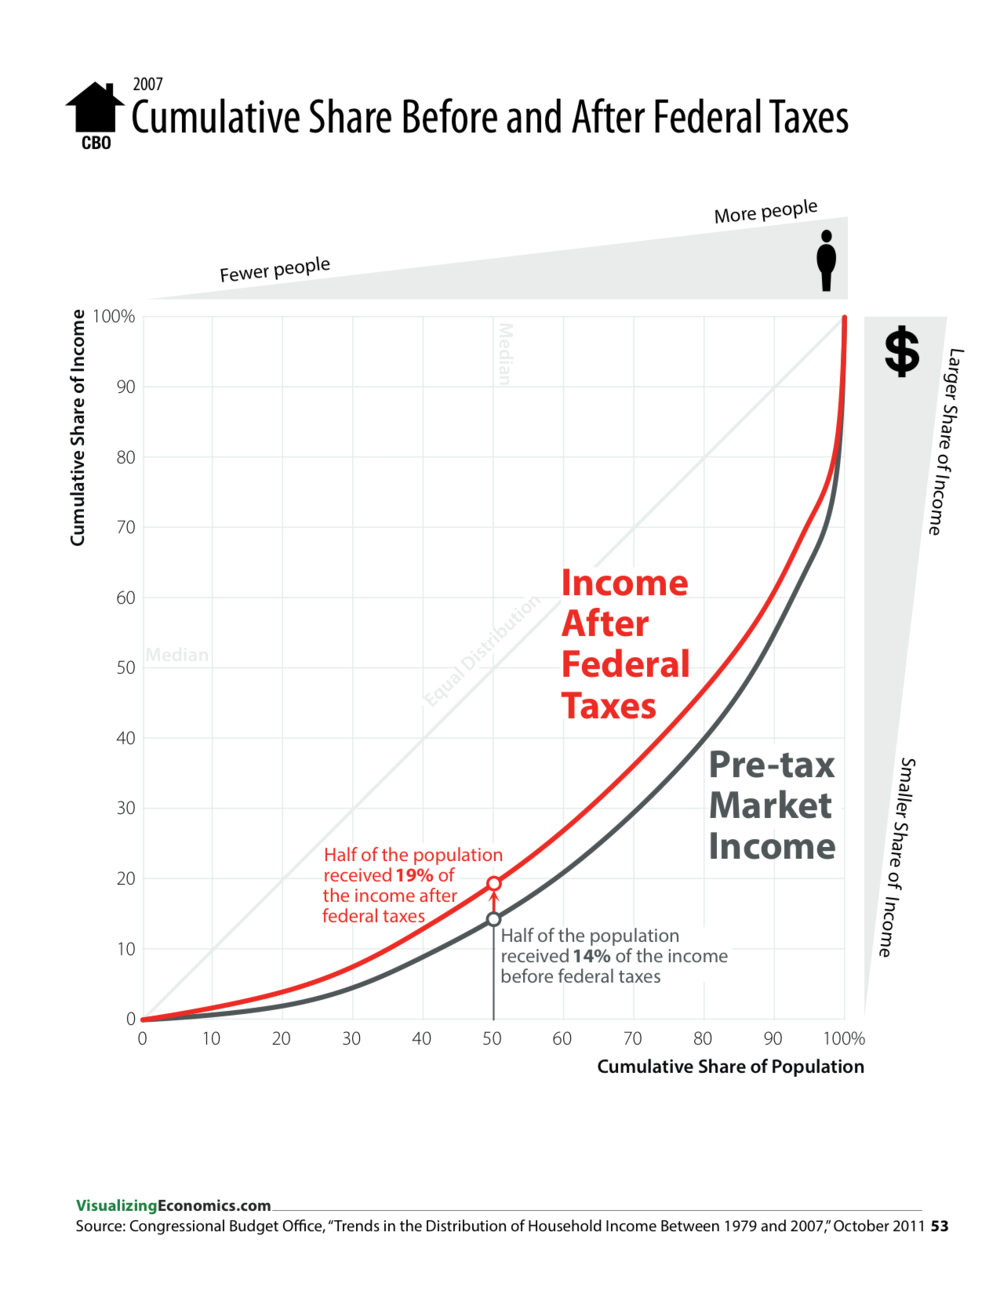 Cumulative Share Before and After Federal Taxes, 2007